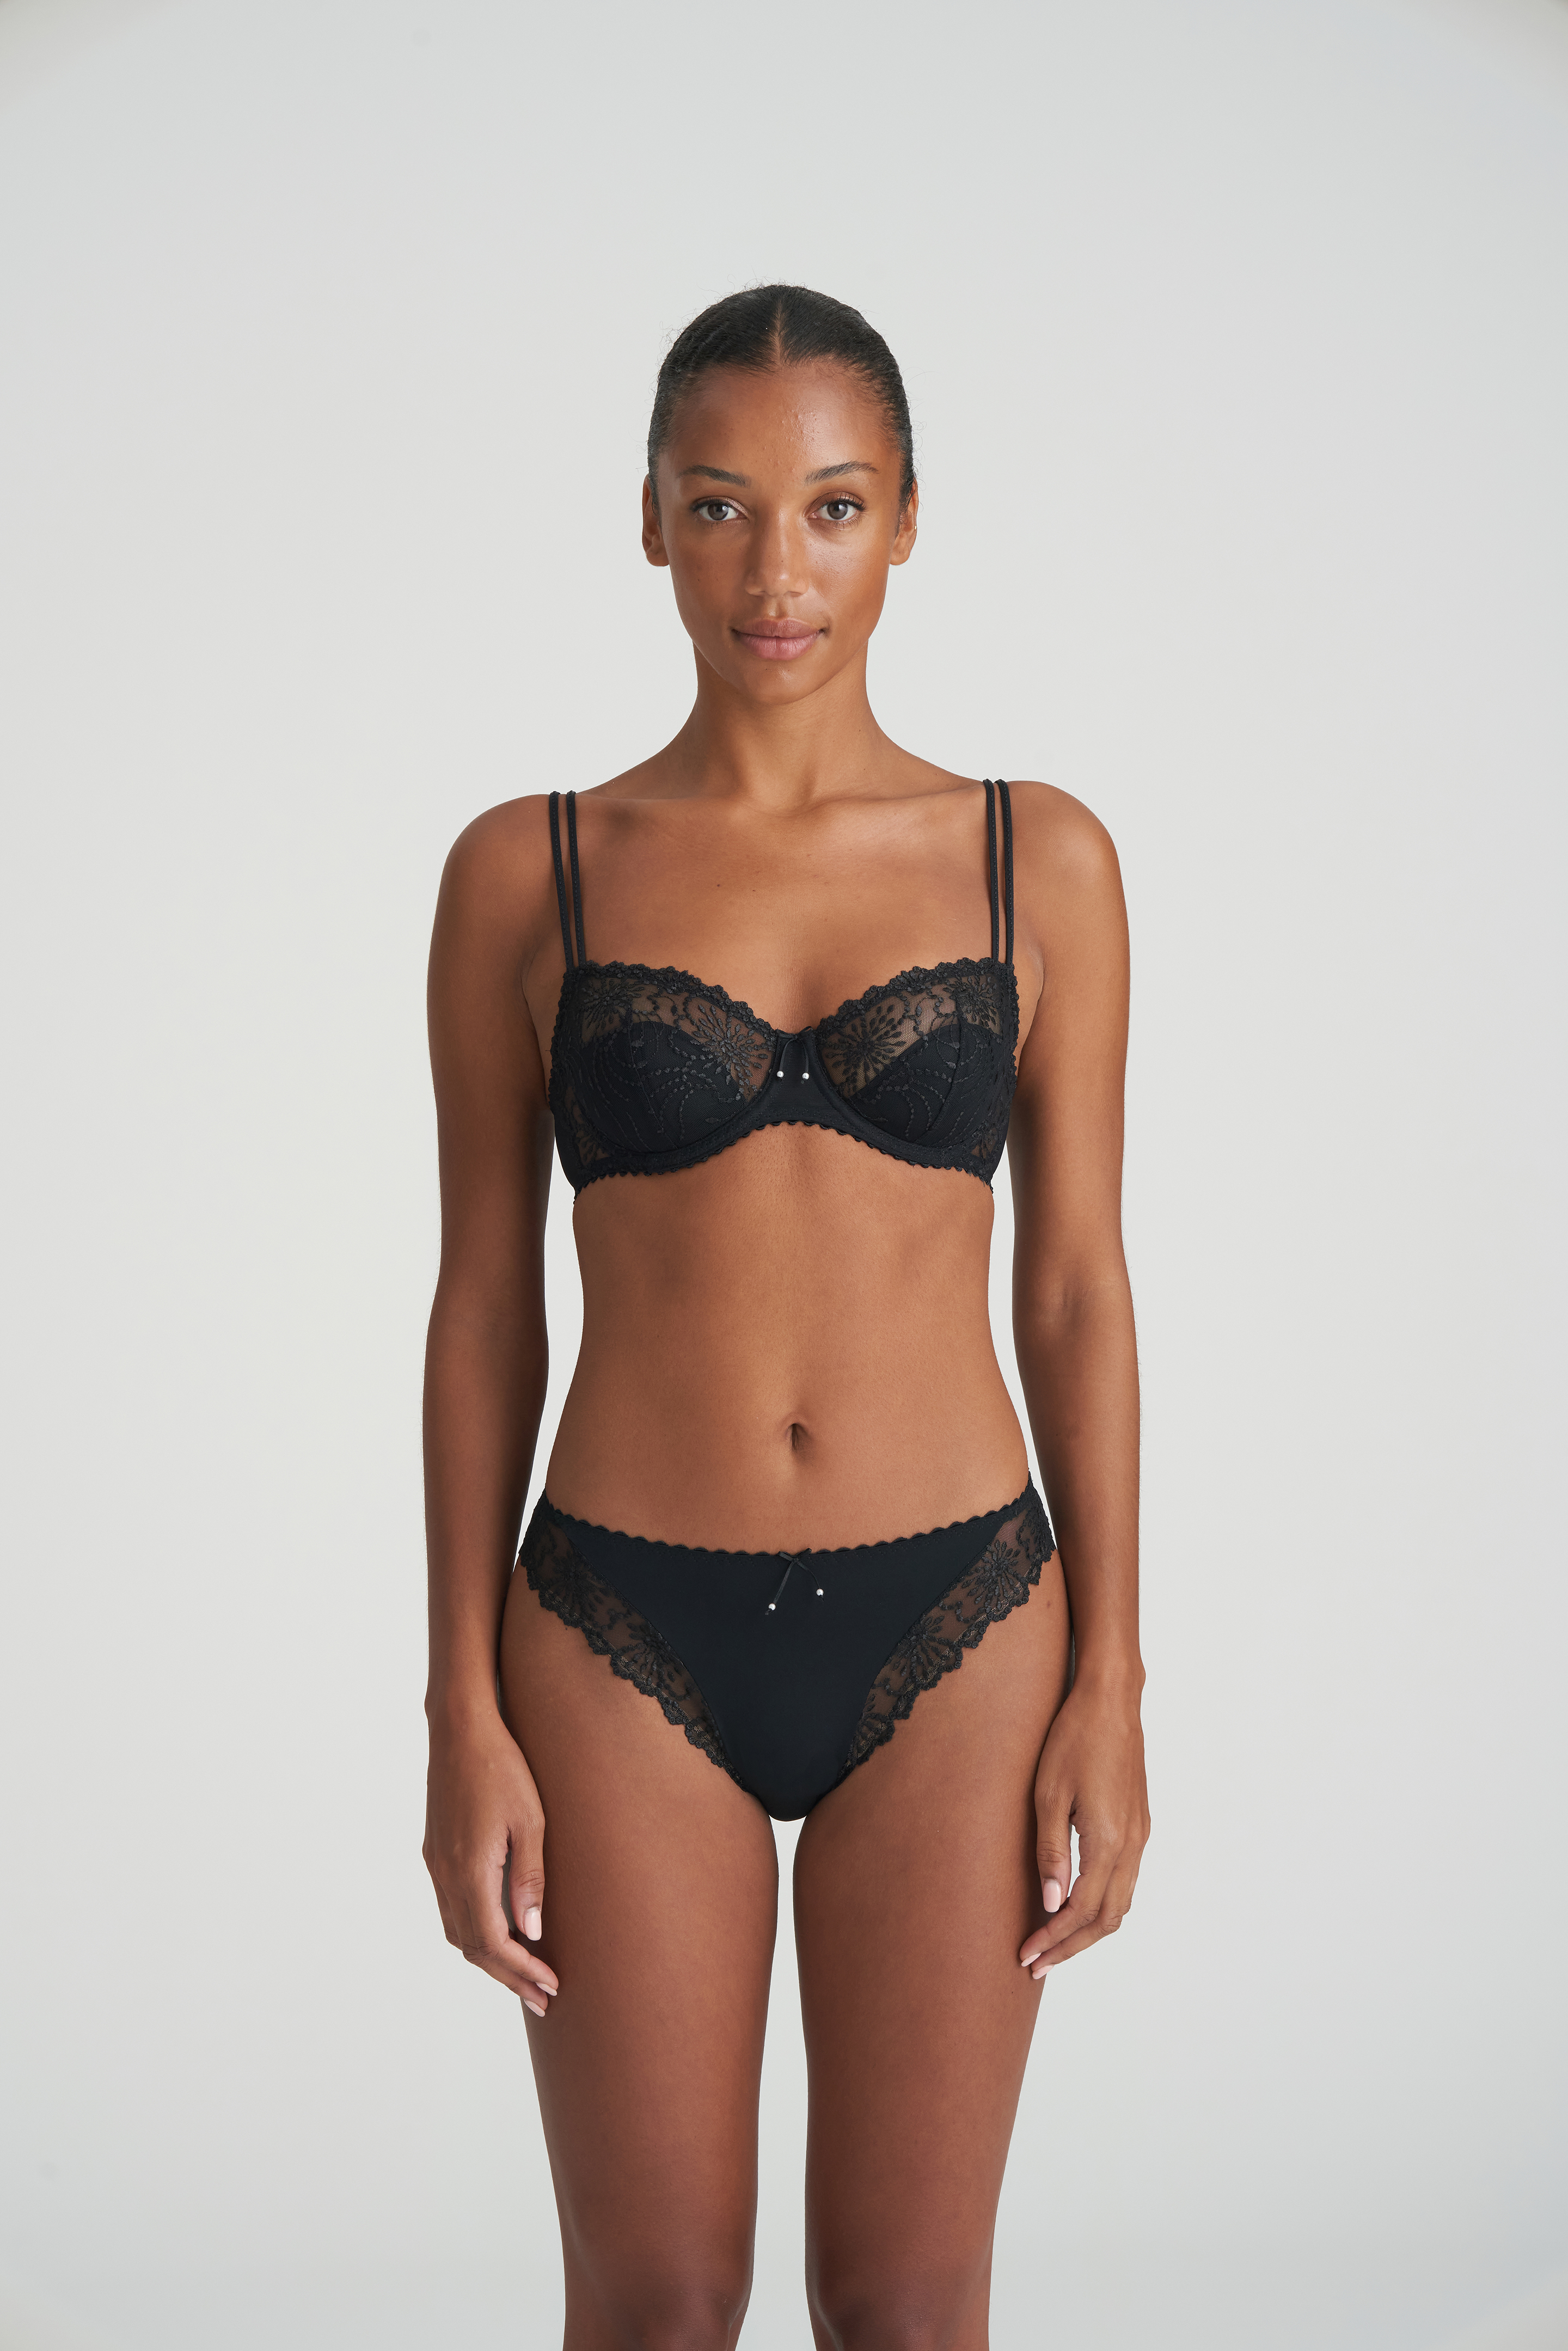 Mabel and Jacks, Lingerie, Nightwear and Swimwear Specialists